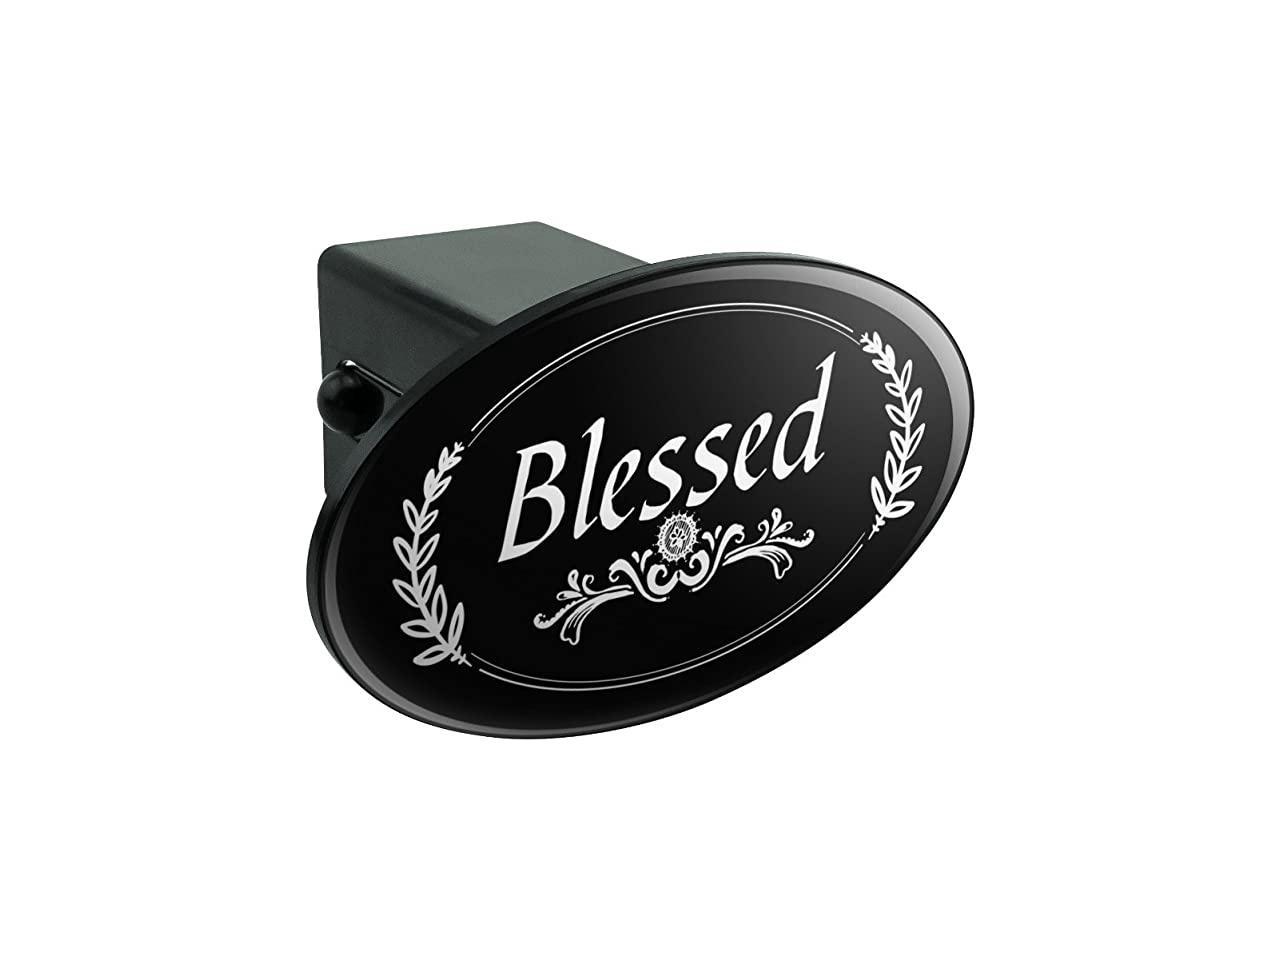 Blessed Halo On Black Oval Tow Hitch Cover Trailer Plug Insert 2 